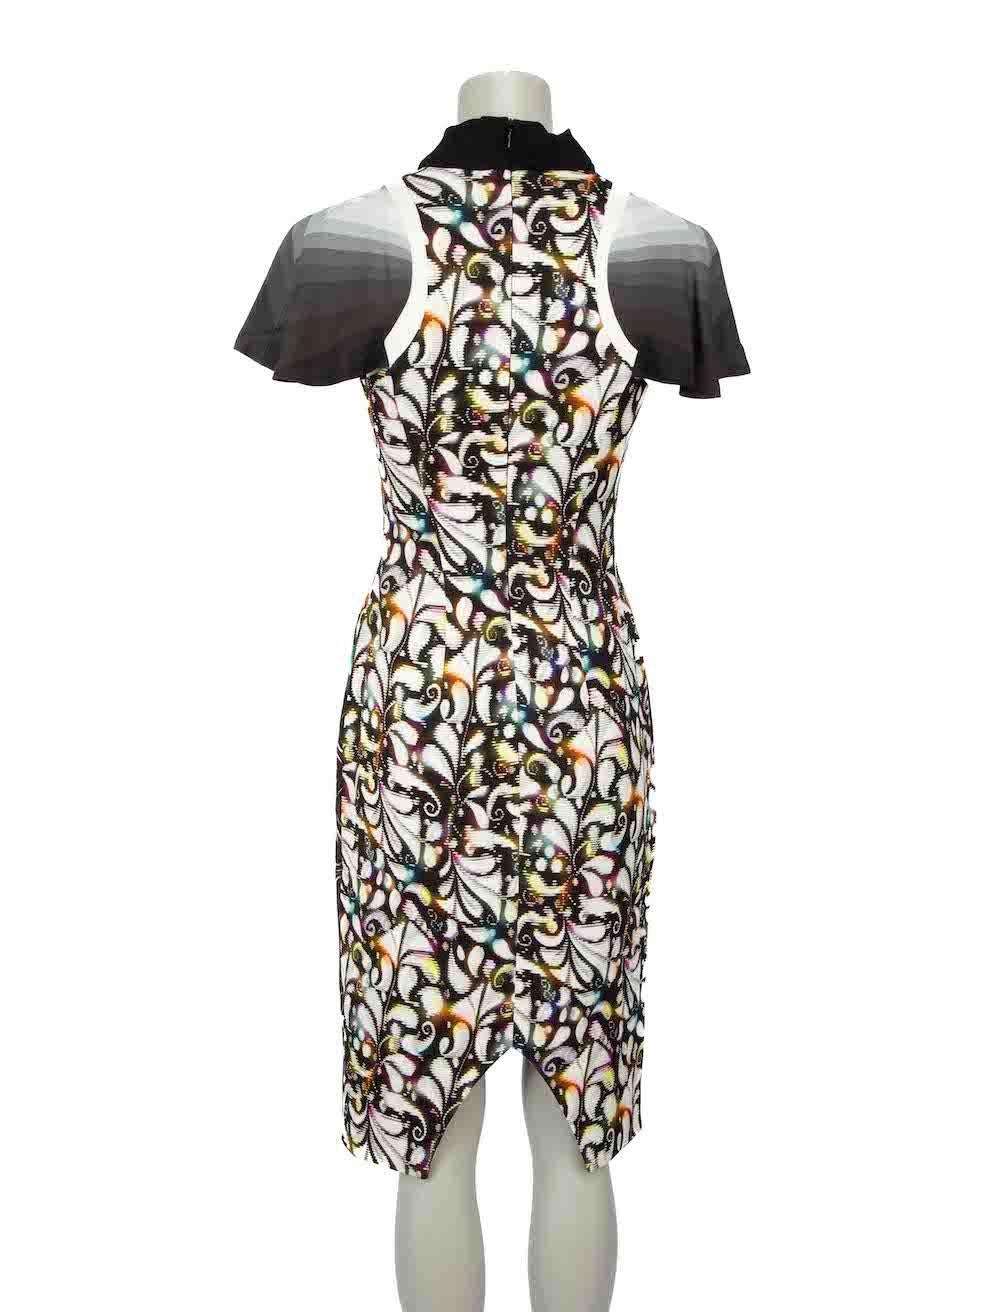 Peter Pilotto Abstract Print Mock Neck Dress Size L In Excellent Condition For Sale In London, GB